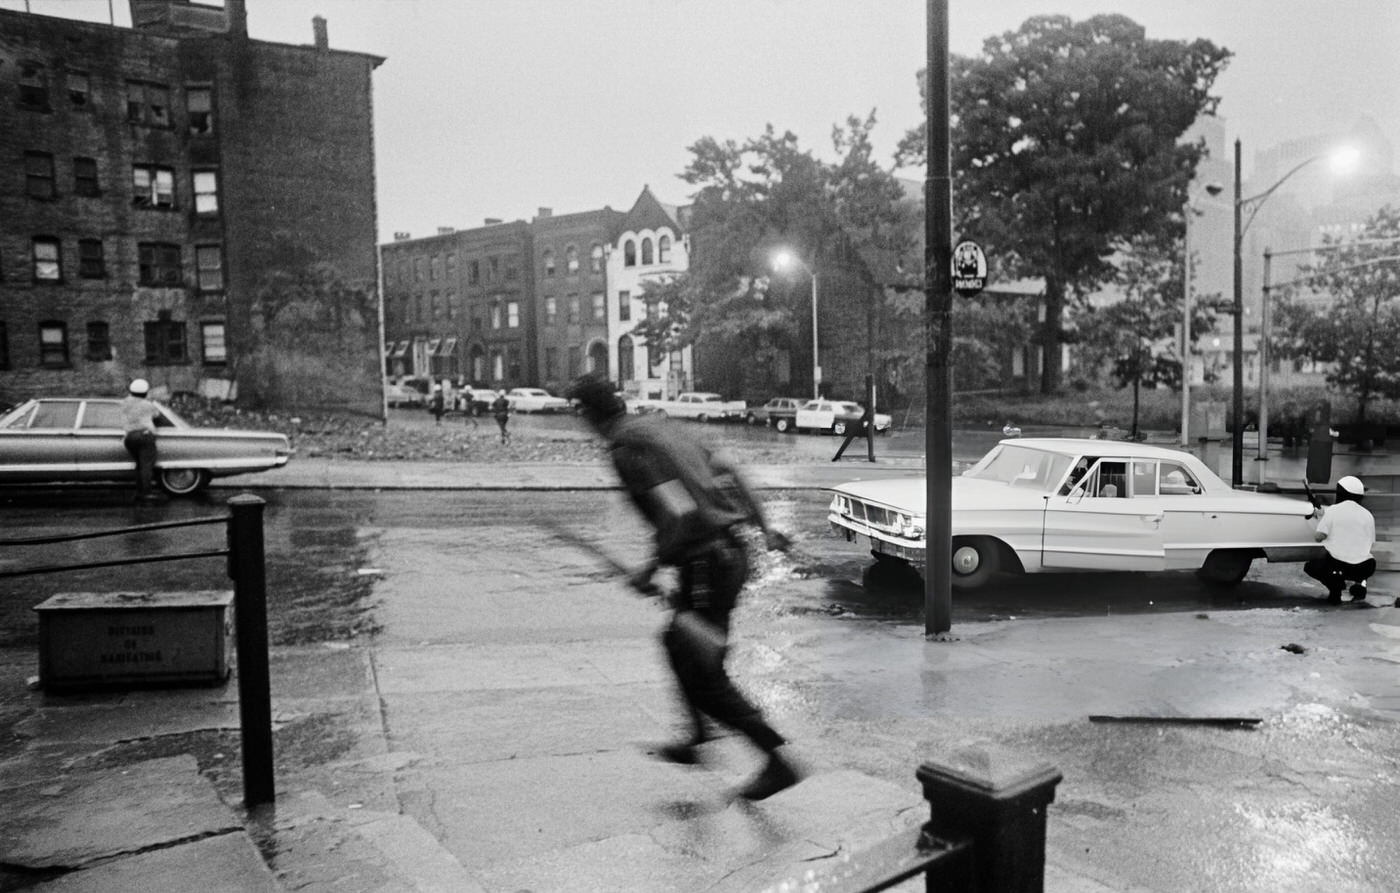 Police take cover behind parked cars during the riots in Newark, New Jersey, 1960s.